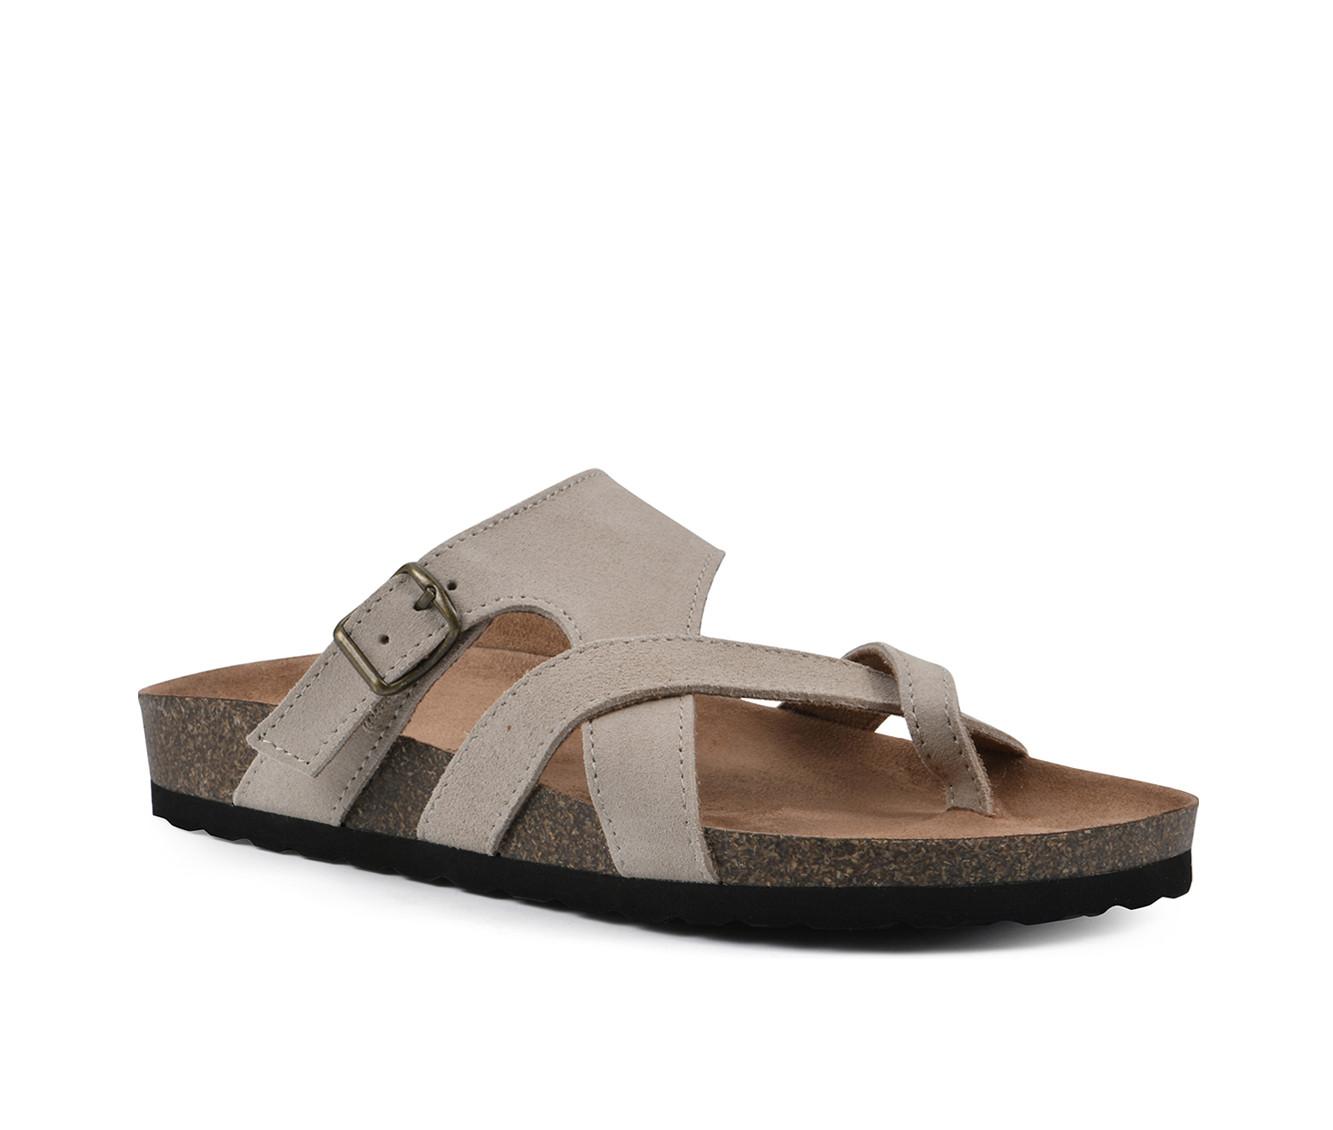 Women's White Mountain Graph Footbed Sandals